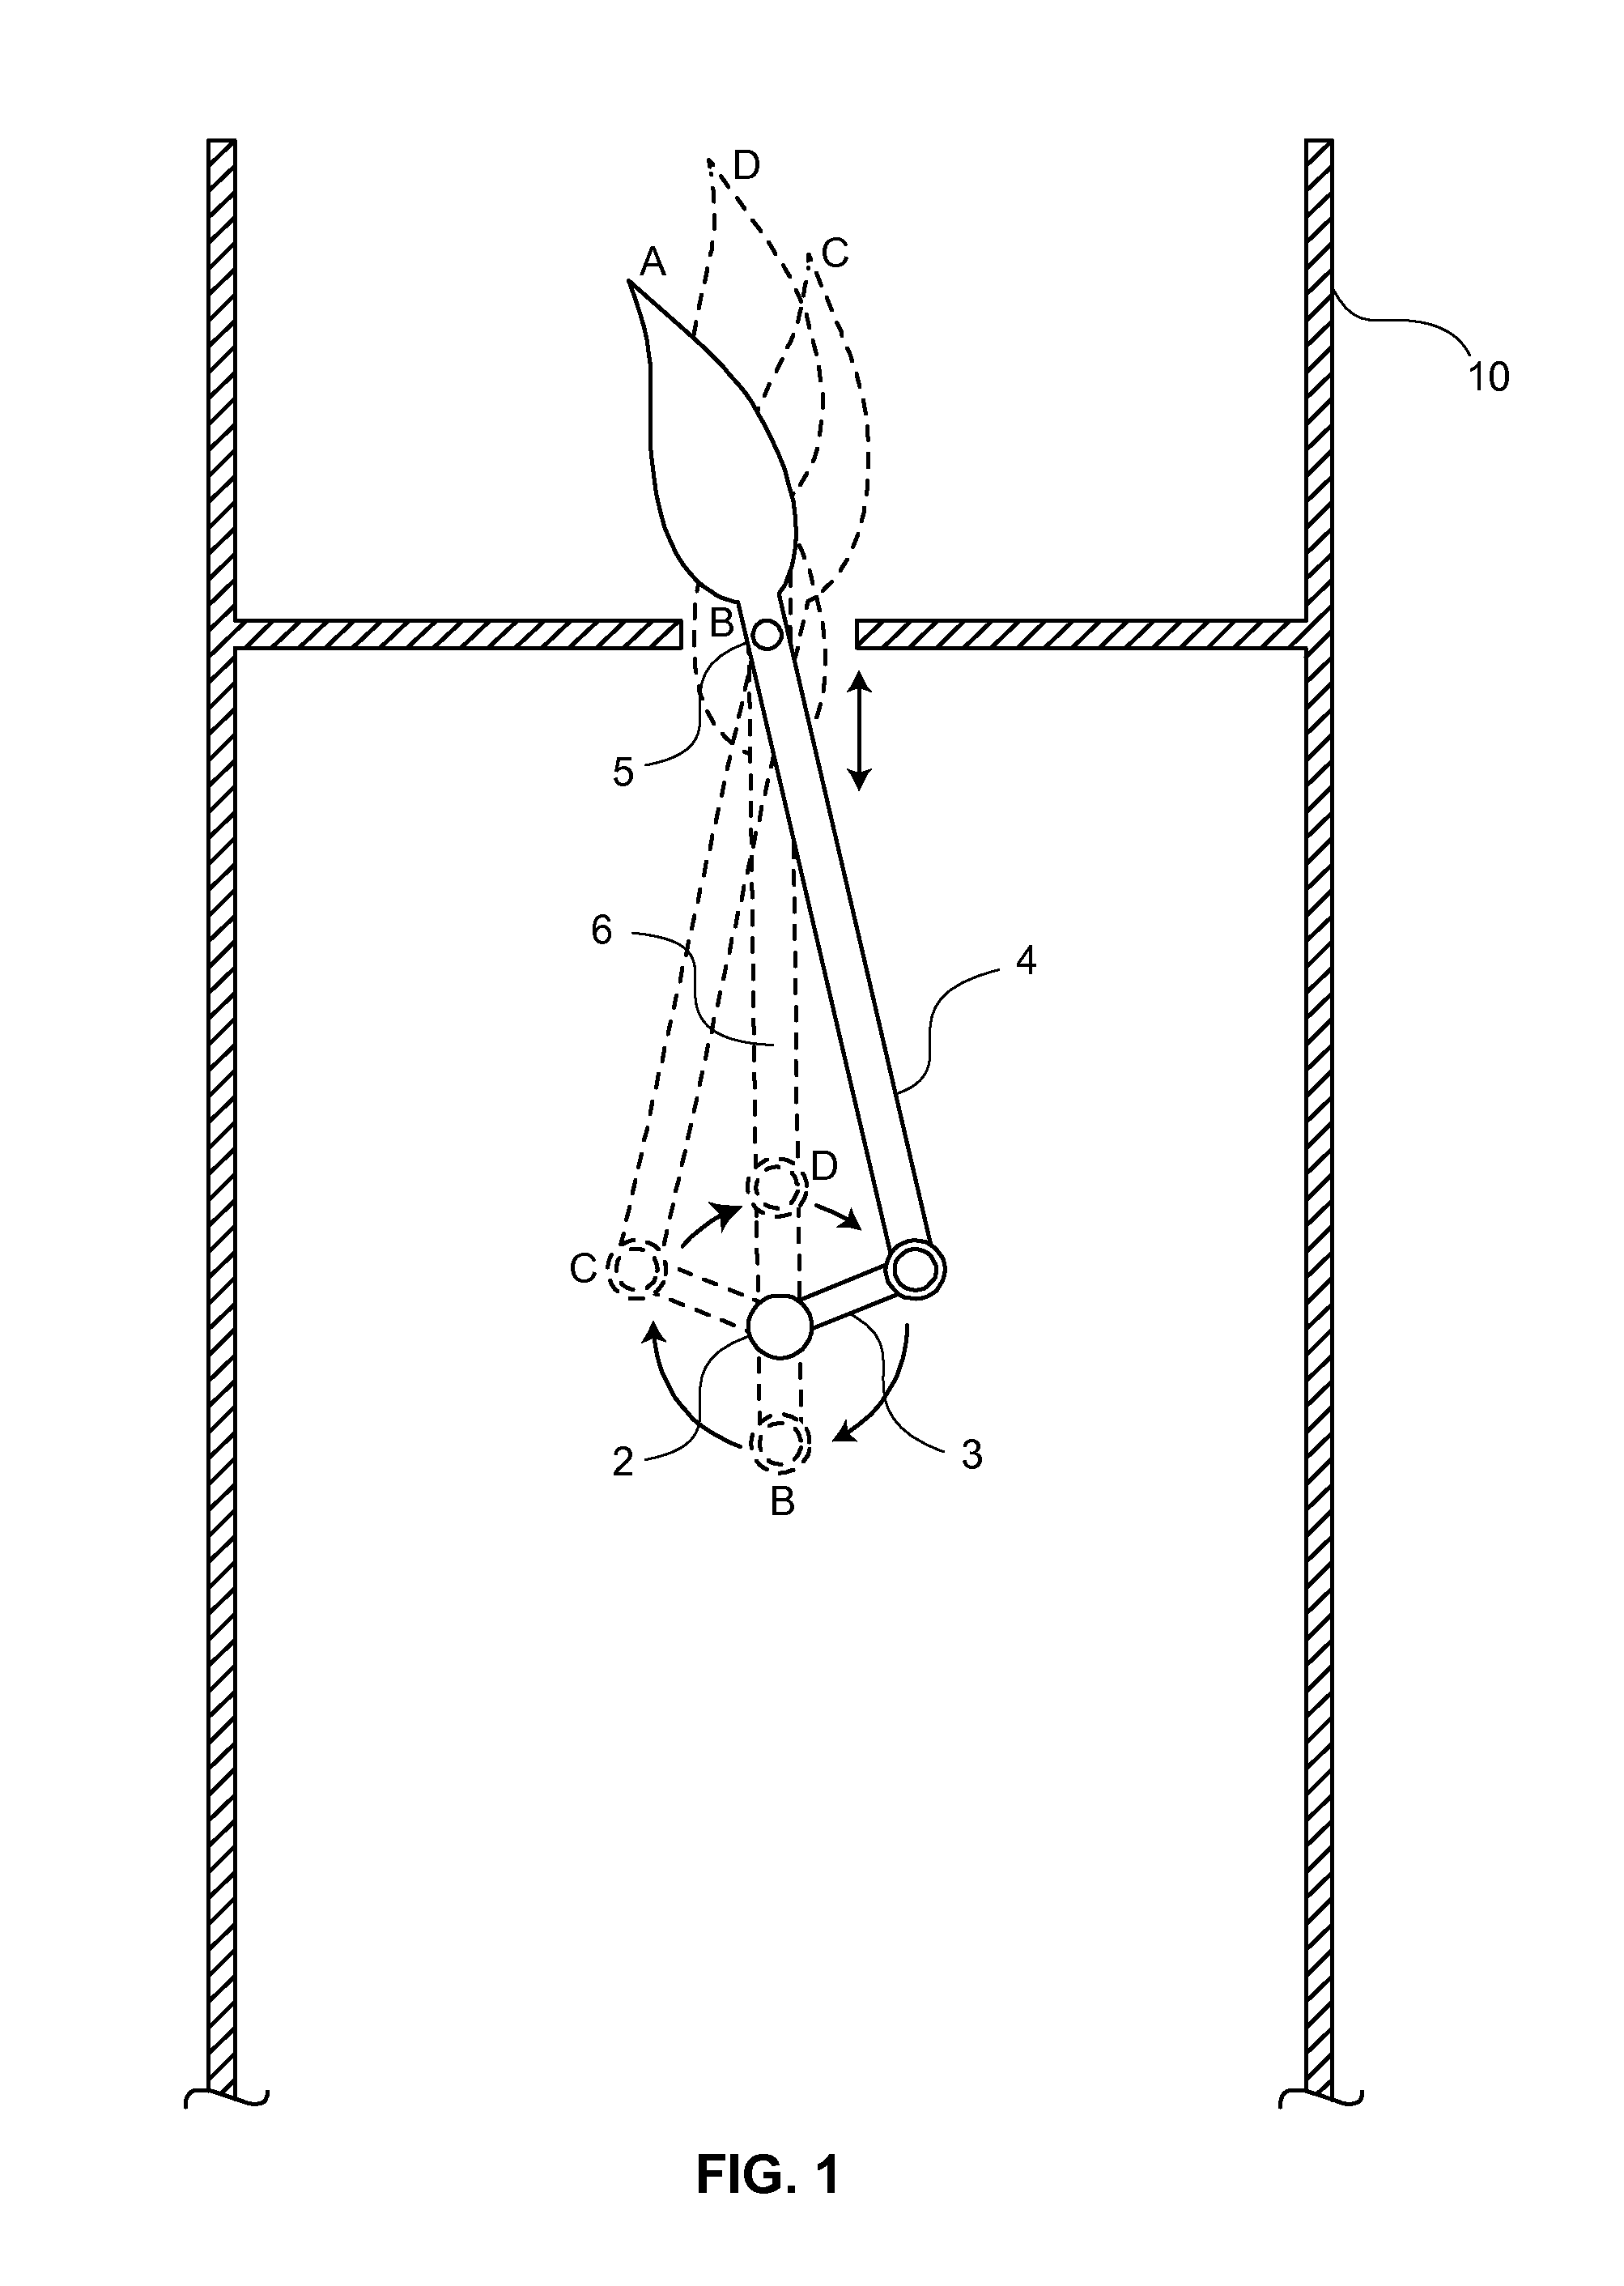 Flameless candle with simulated flame movement